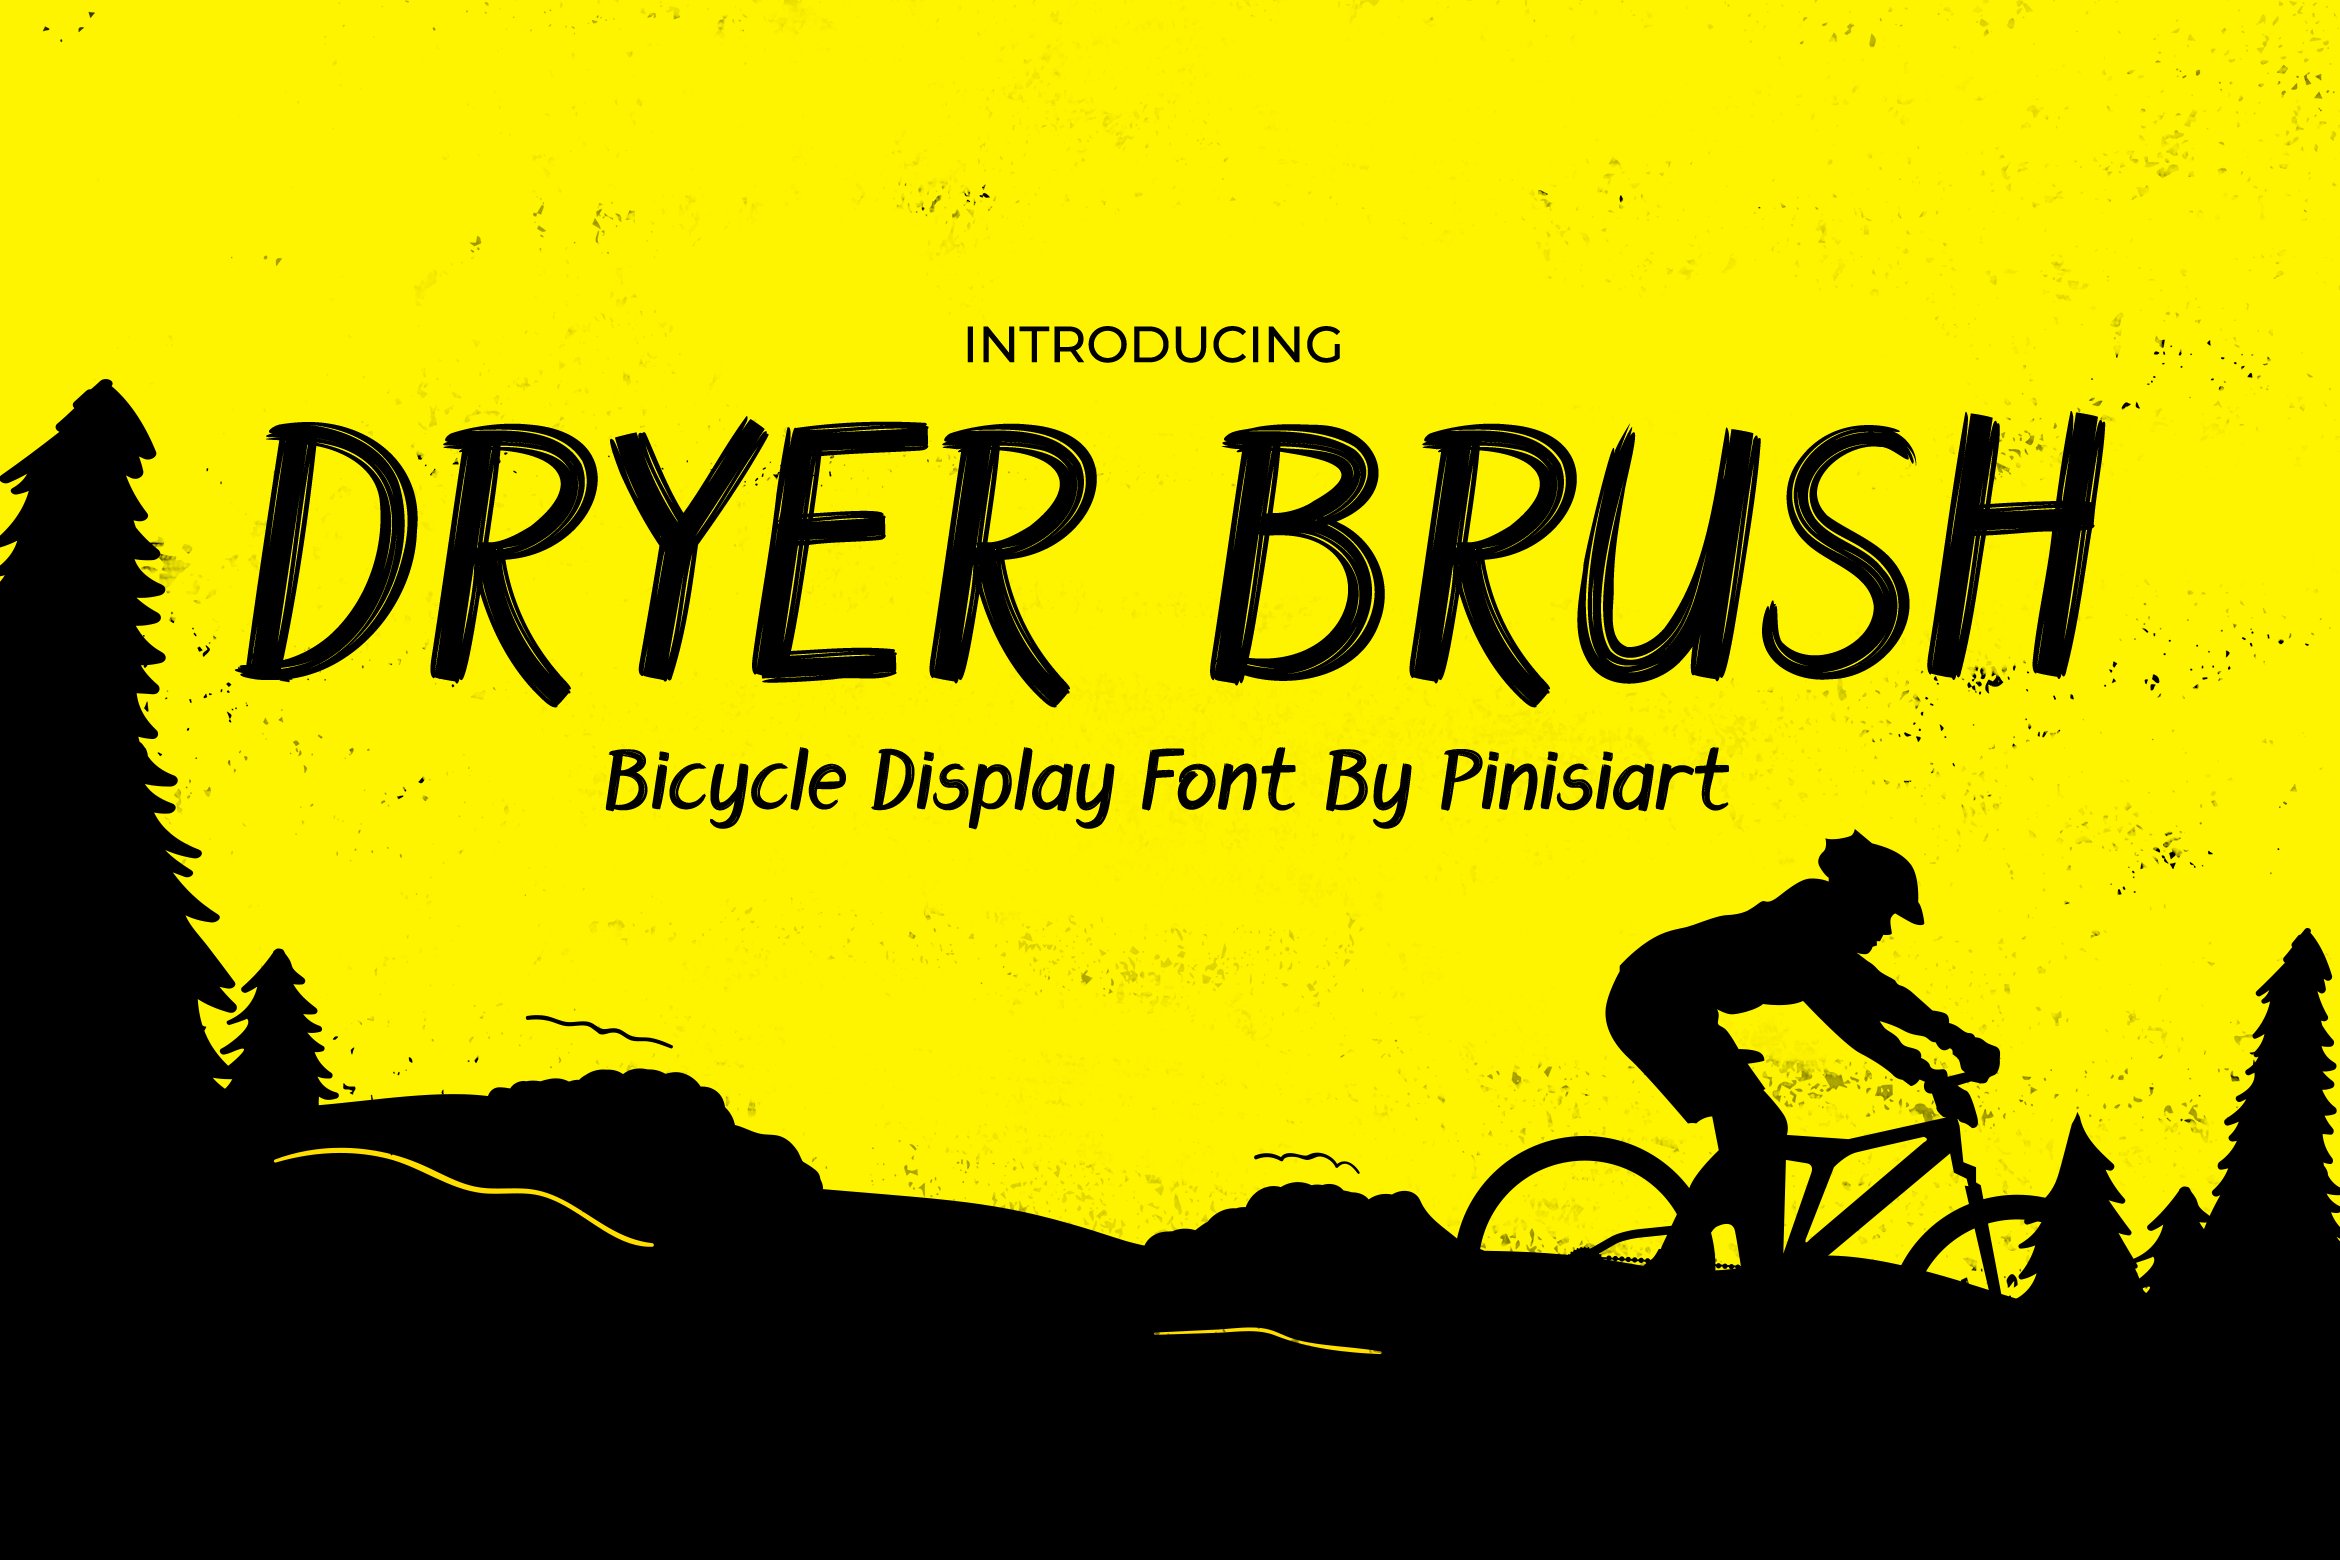 Dryer Brush – Bicycle Display Font cover image.